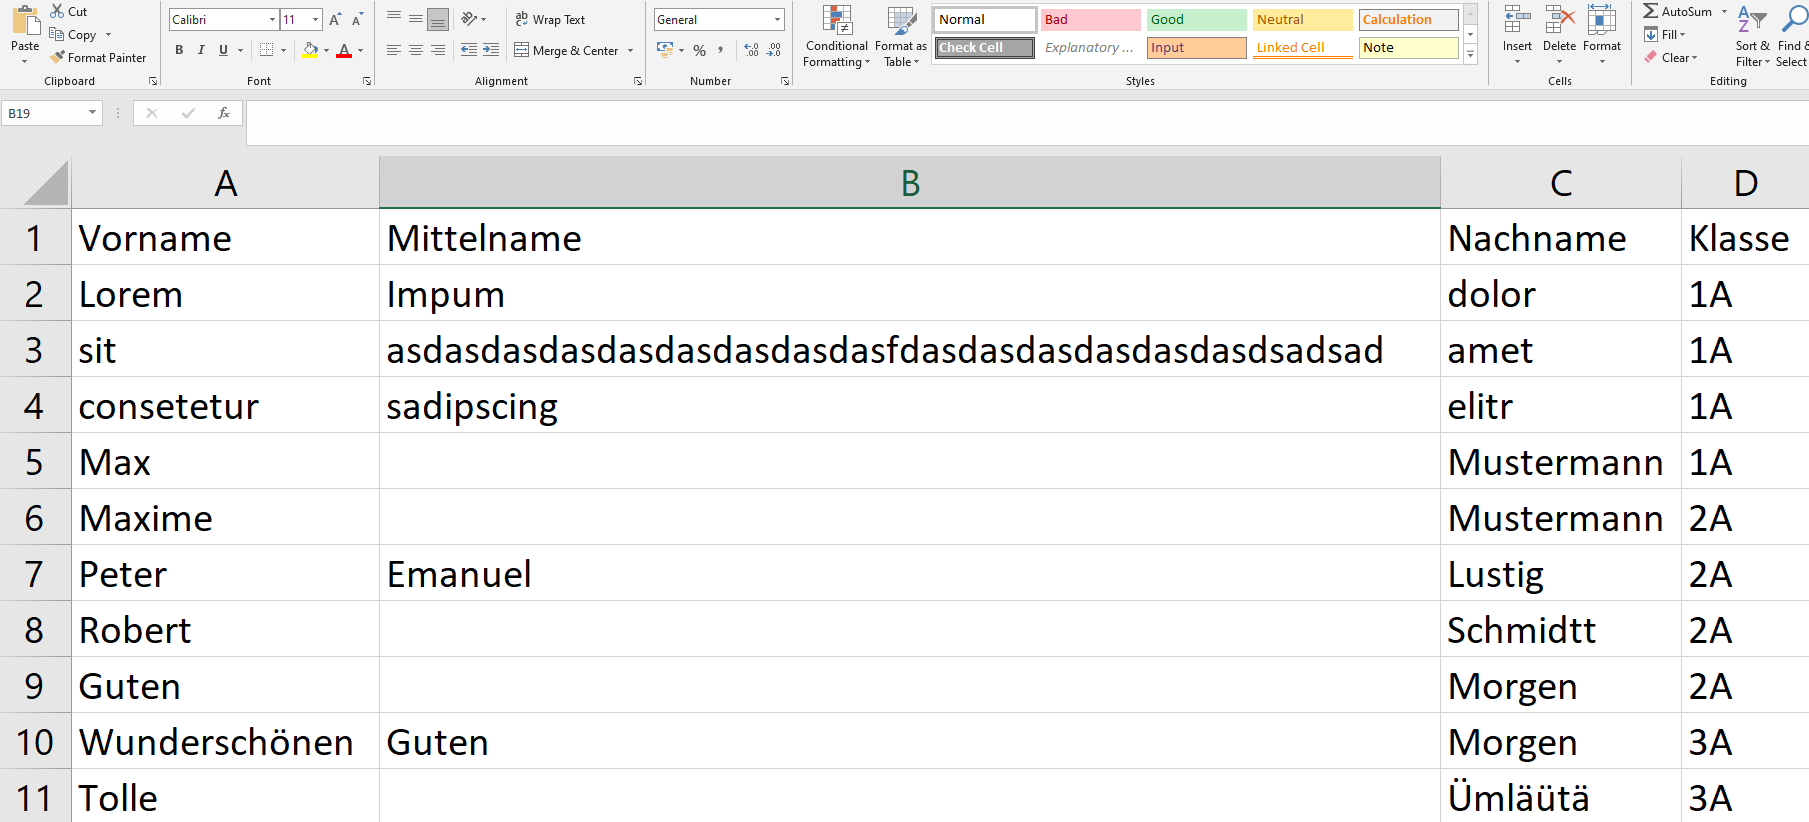 Excel Screenshot with Middlename